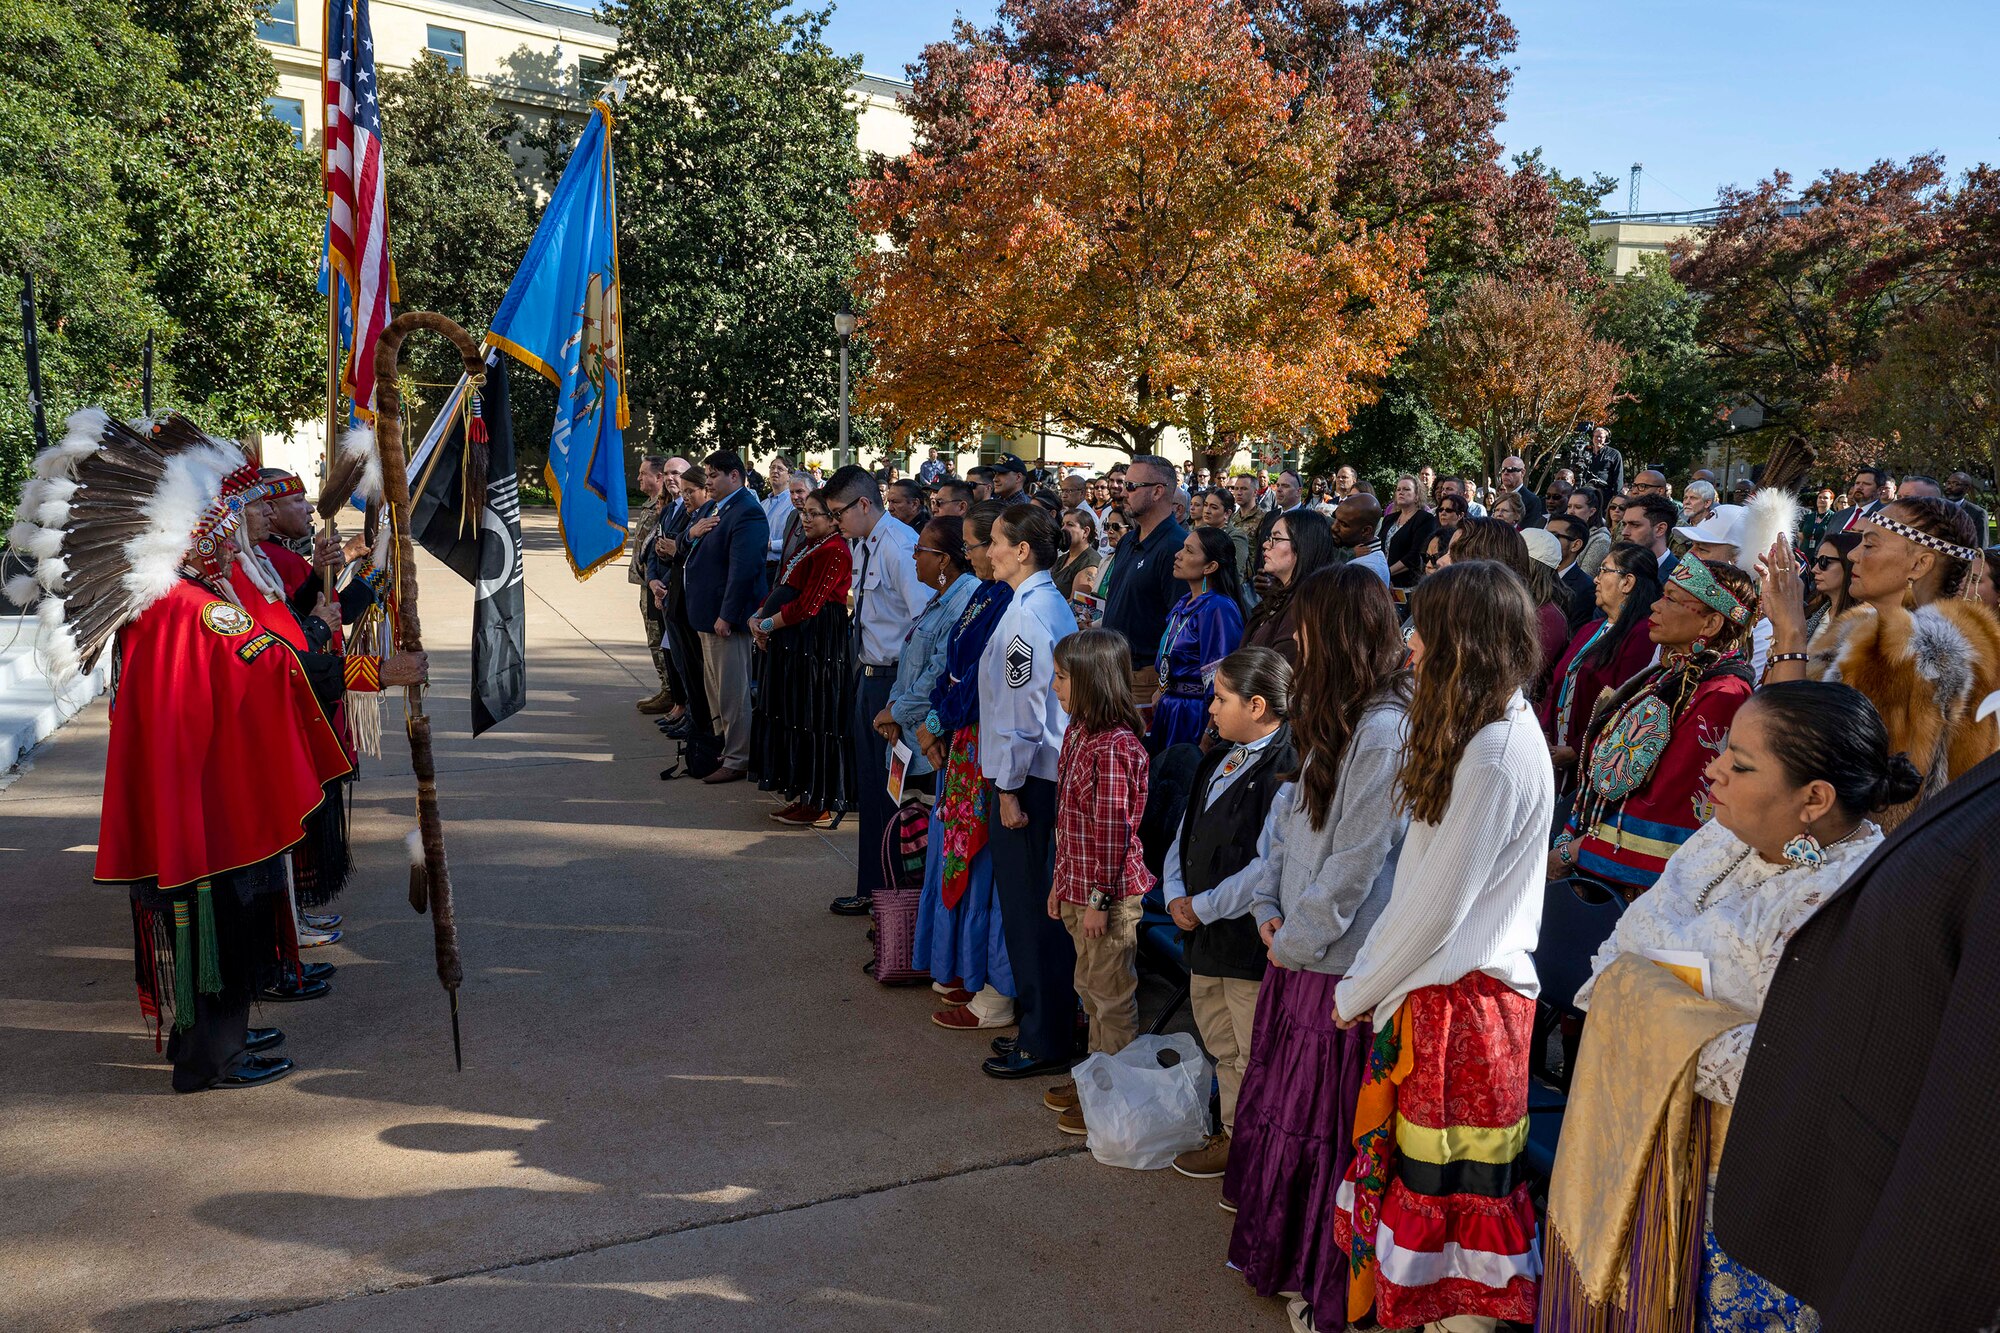 People wearing traditional Native American clothing stand and hold flags while facing a standing audience outdoors.